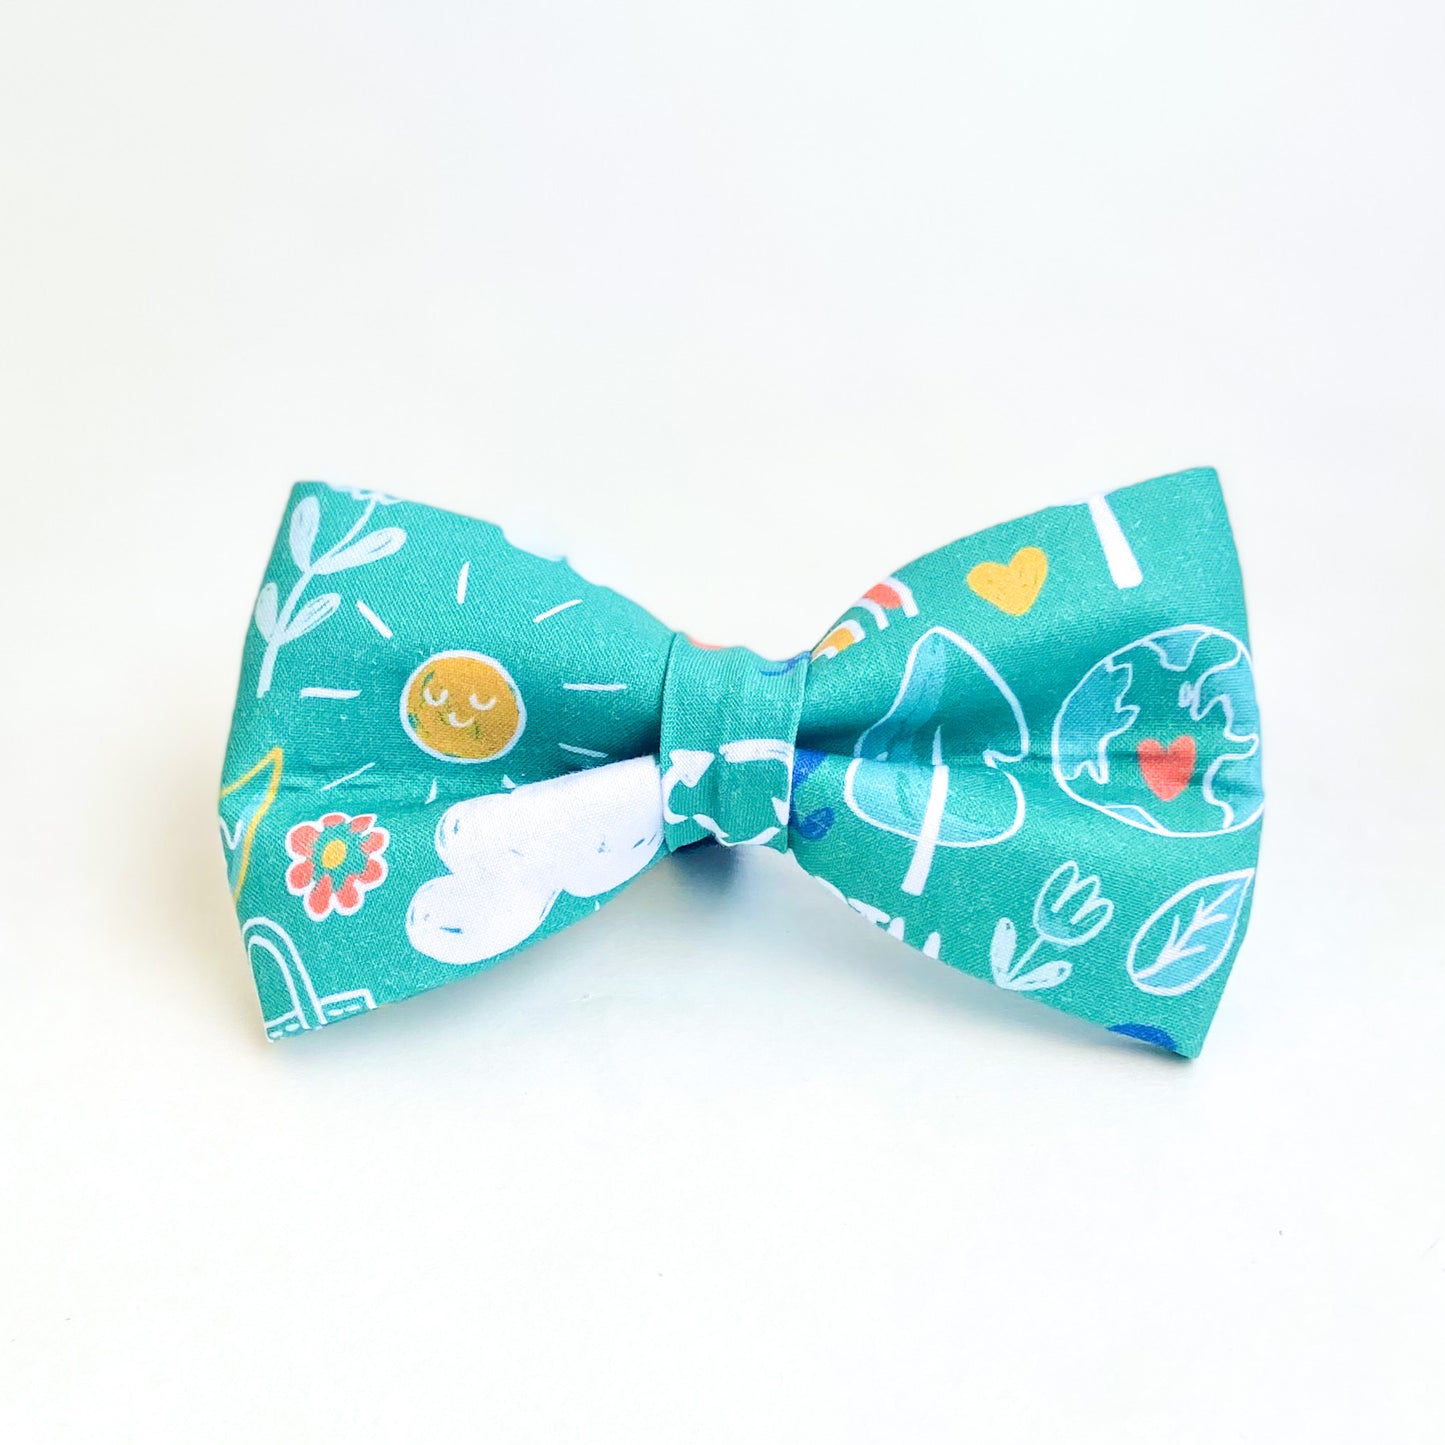 Earth day every day! dog bow tie pet accessory